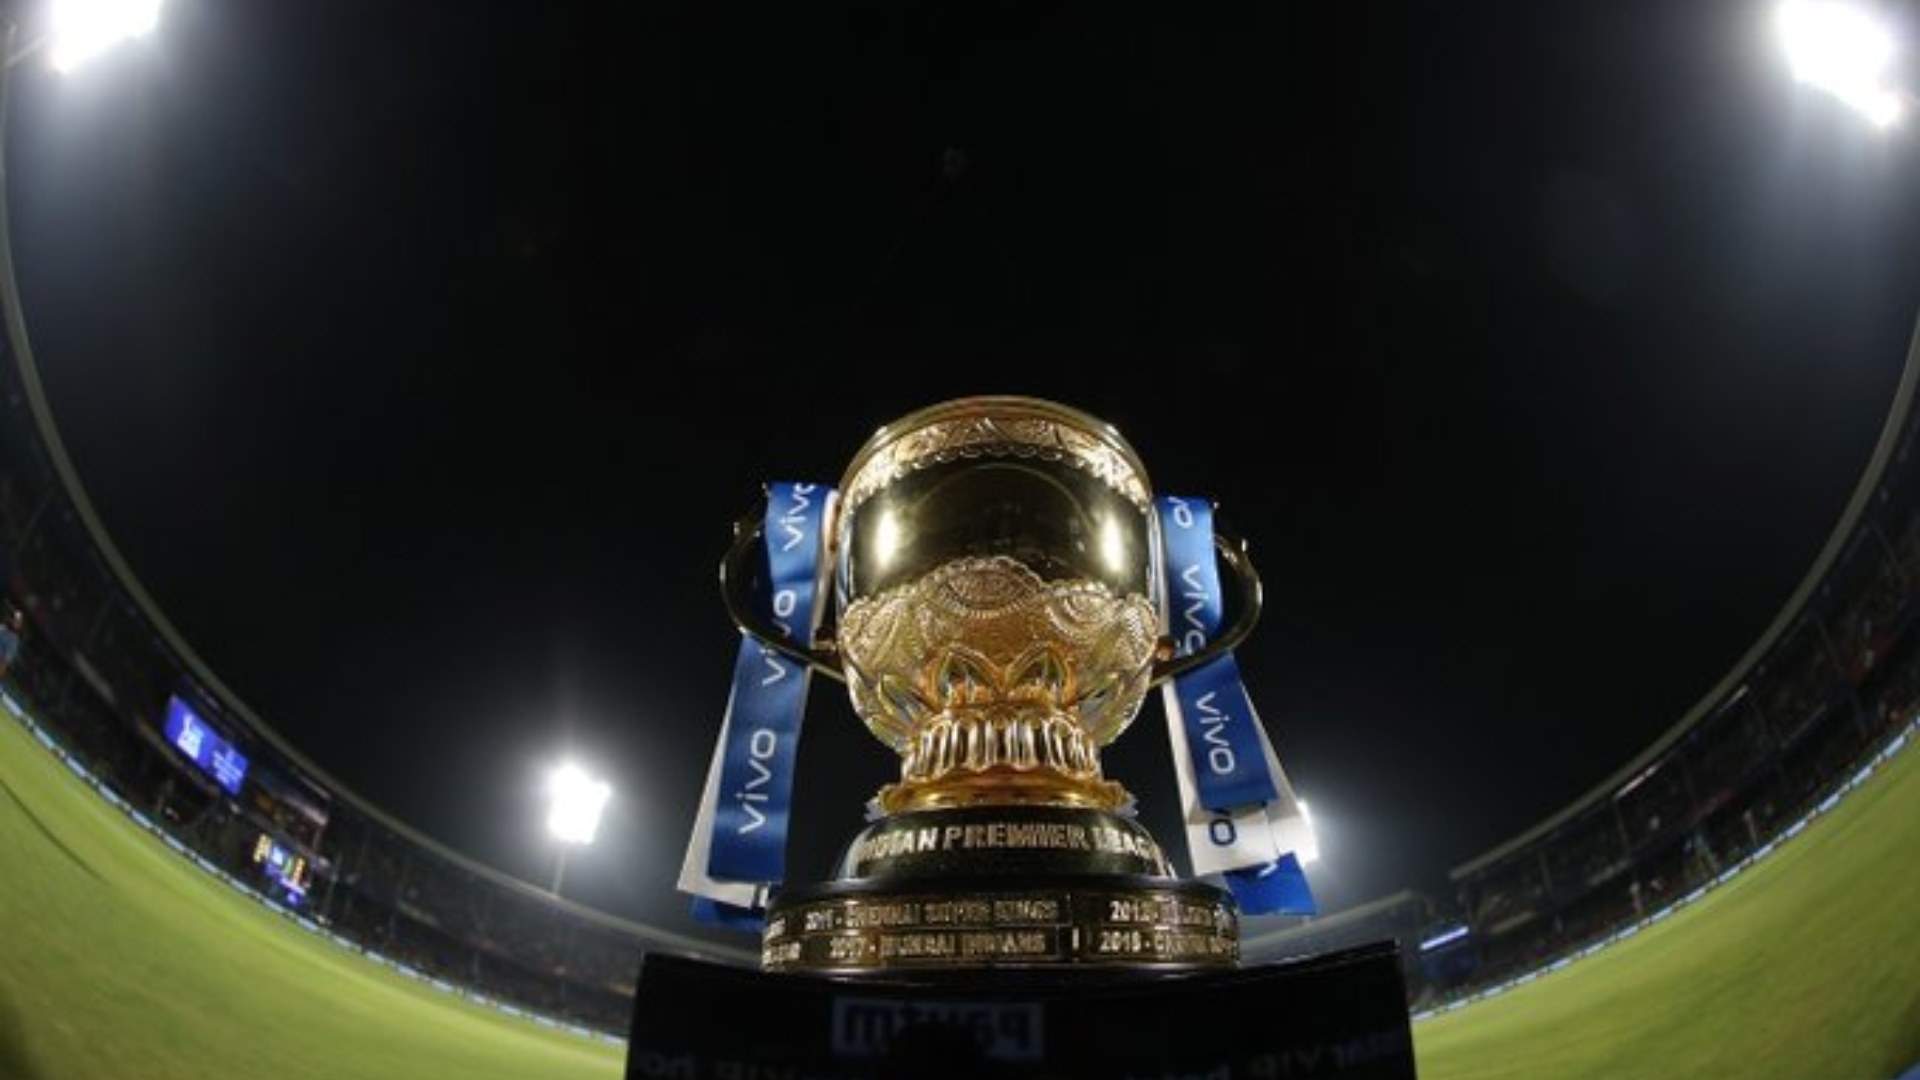 IPL 2021 might not resume in India due to the coronavirus restrictions after Sourav Ganguly's admission.